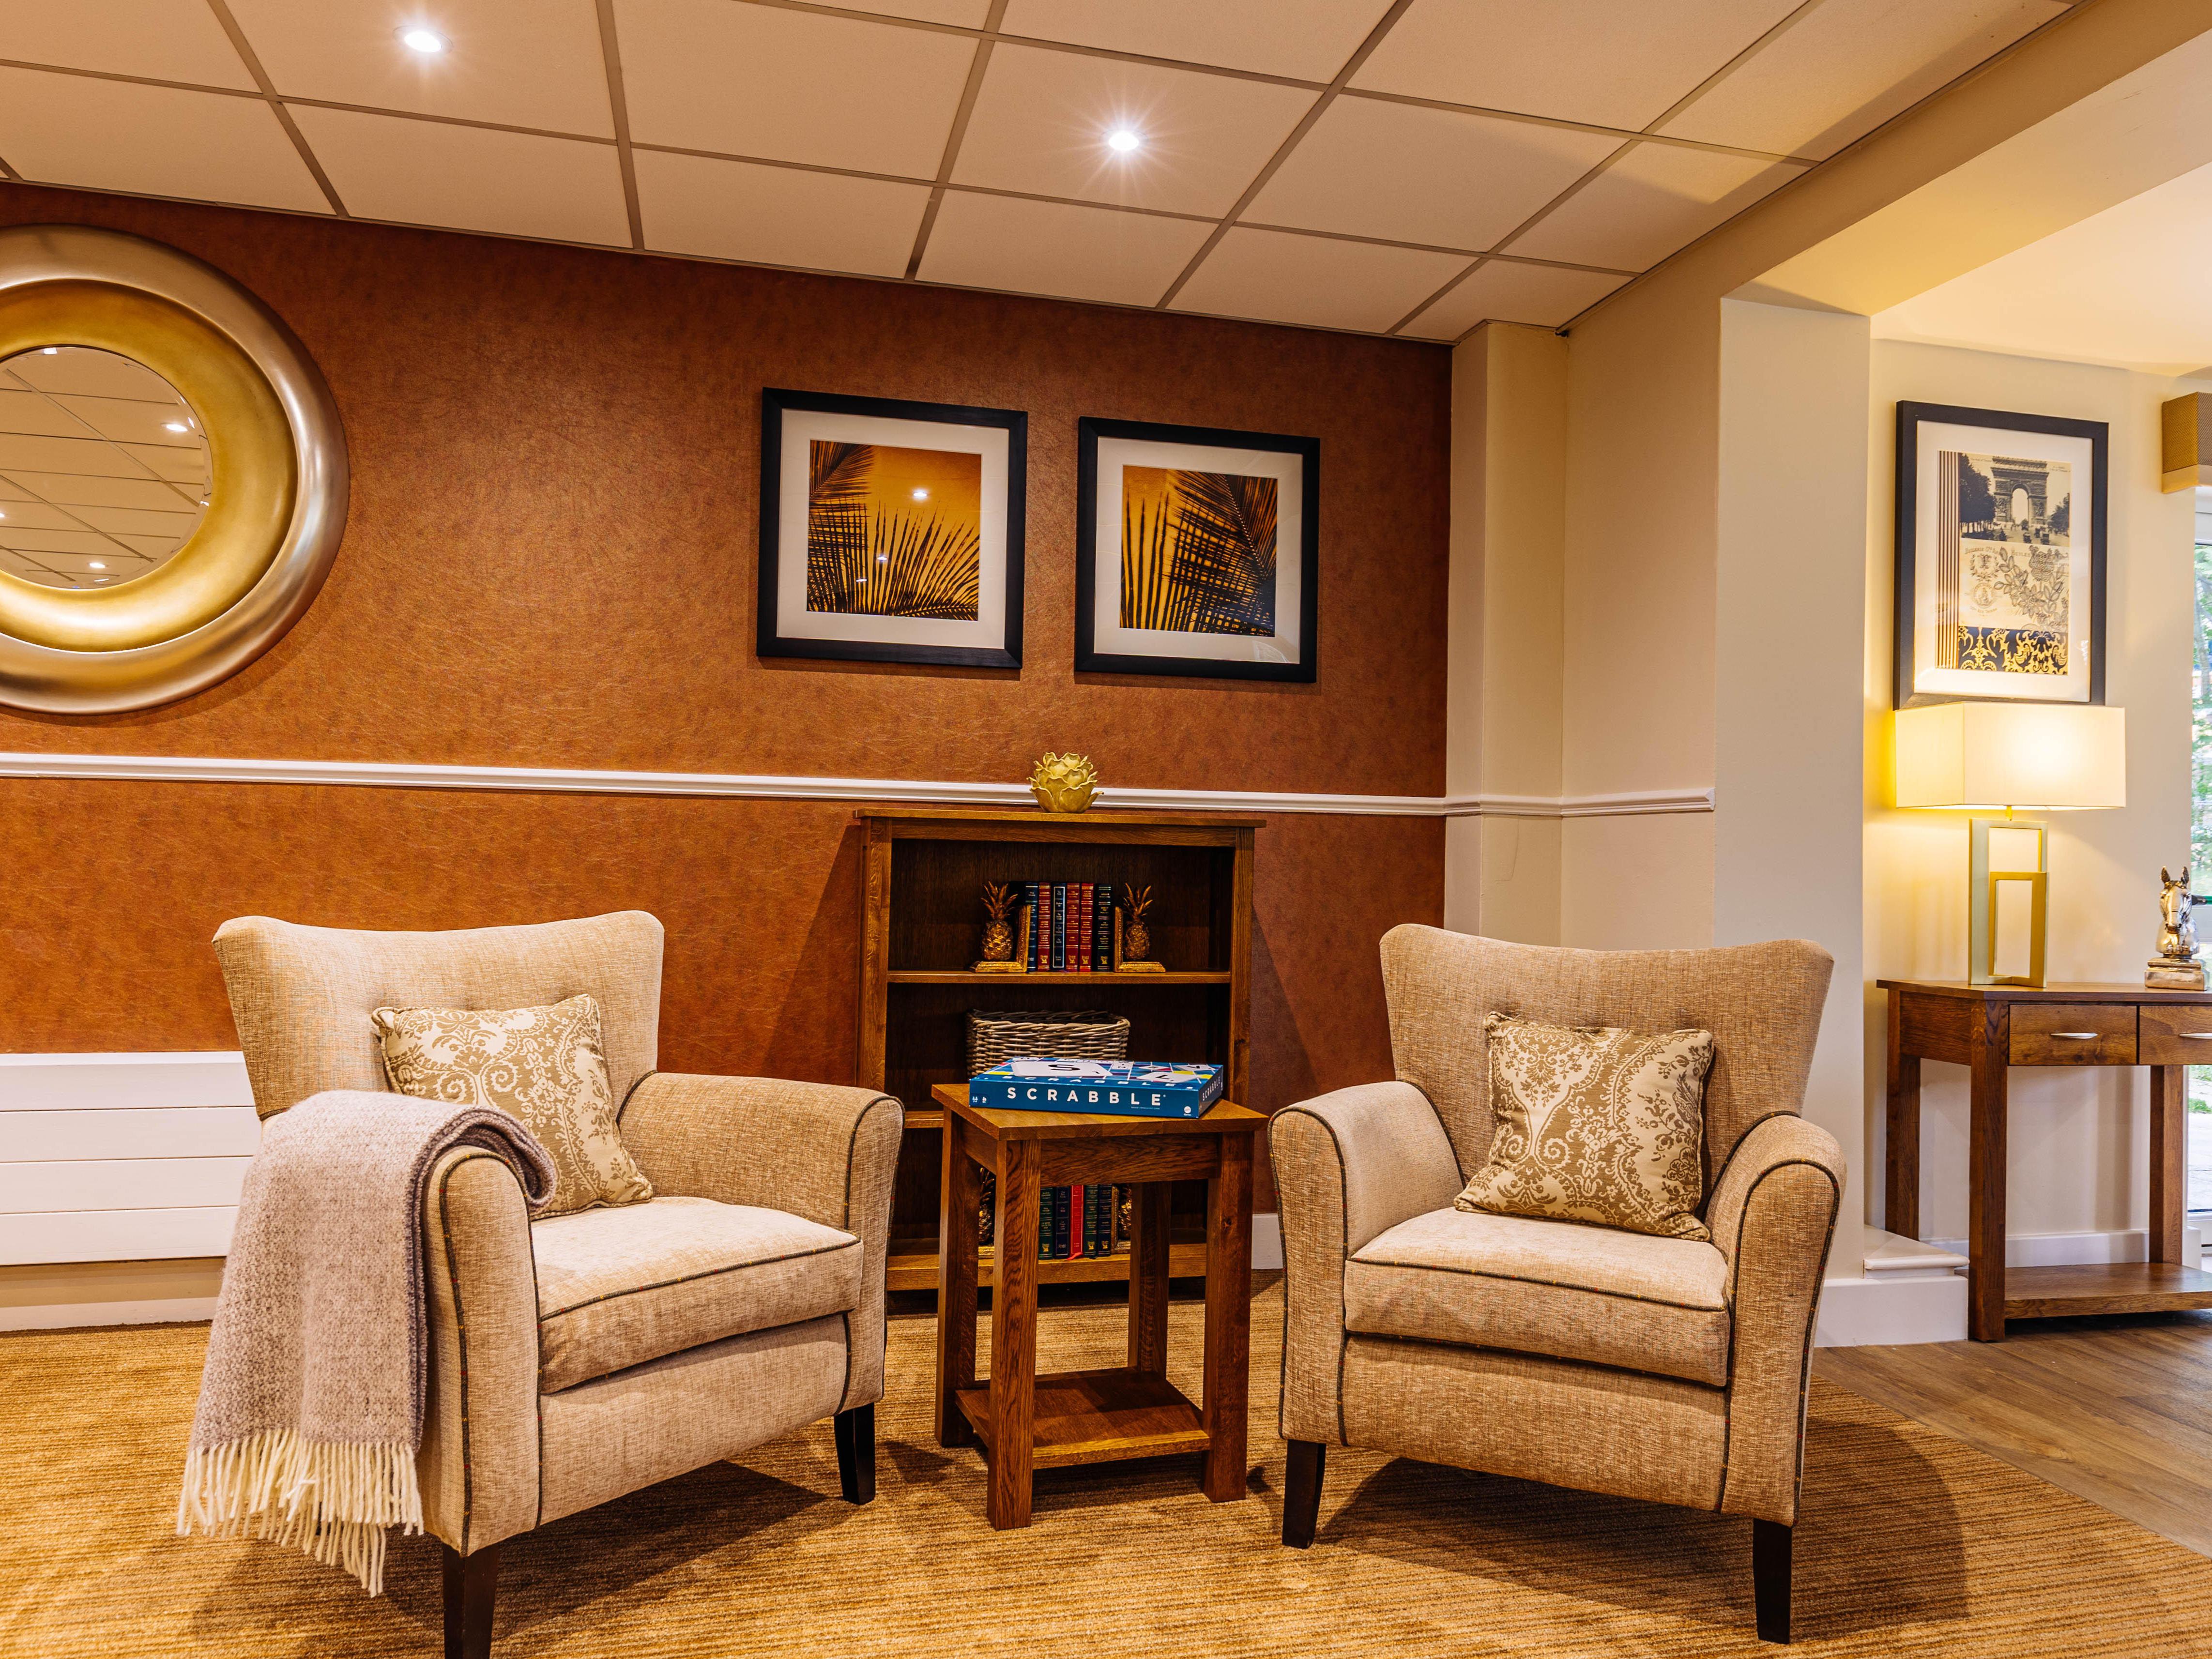 Barchester - Four Hills Care Home Glasgow 01413 368050